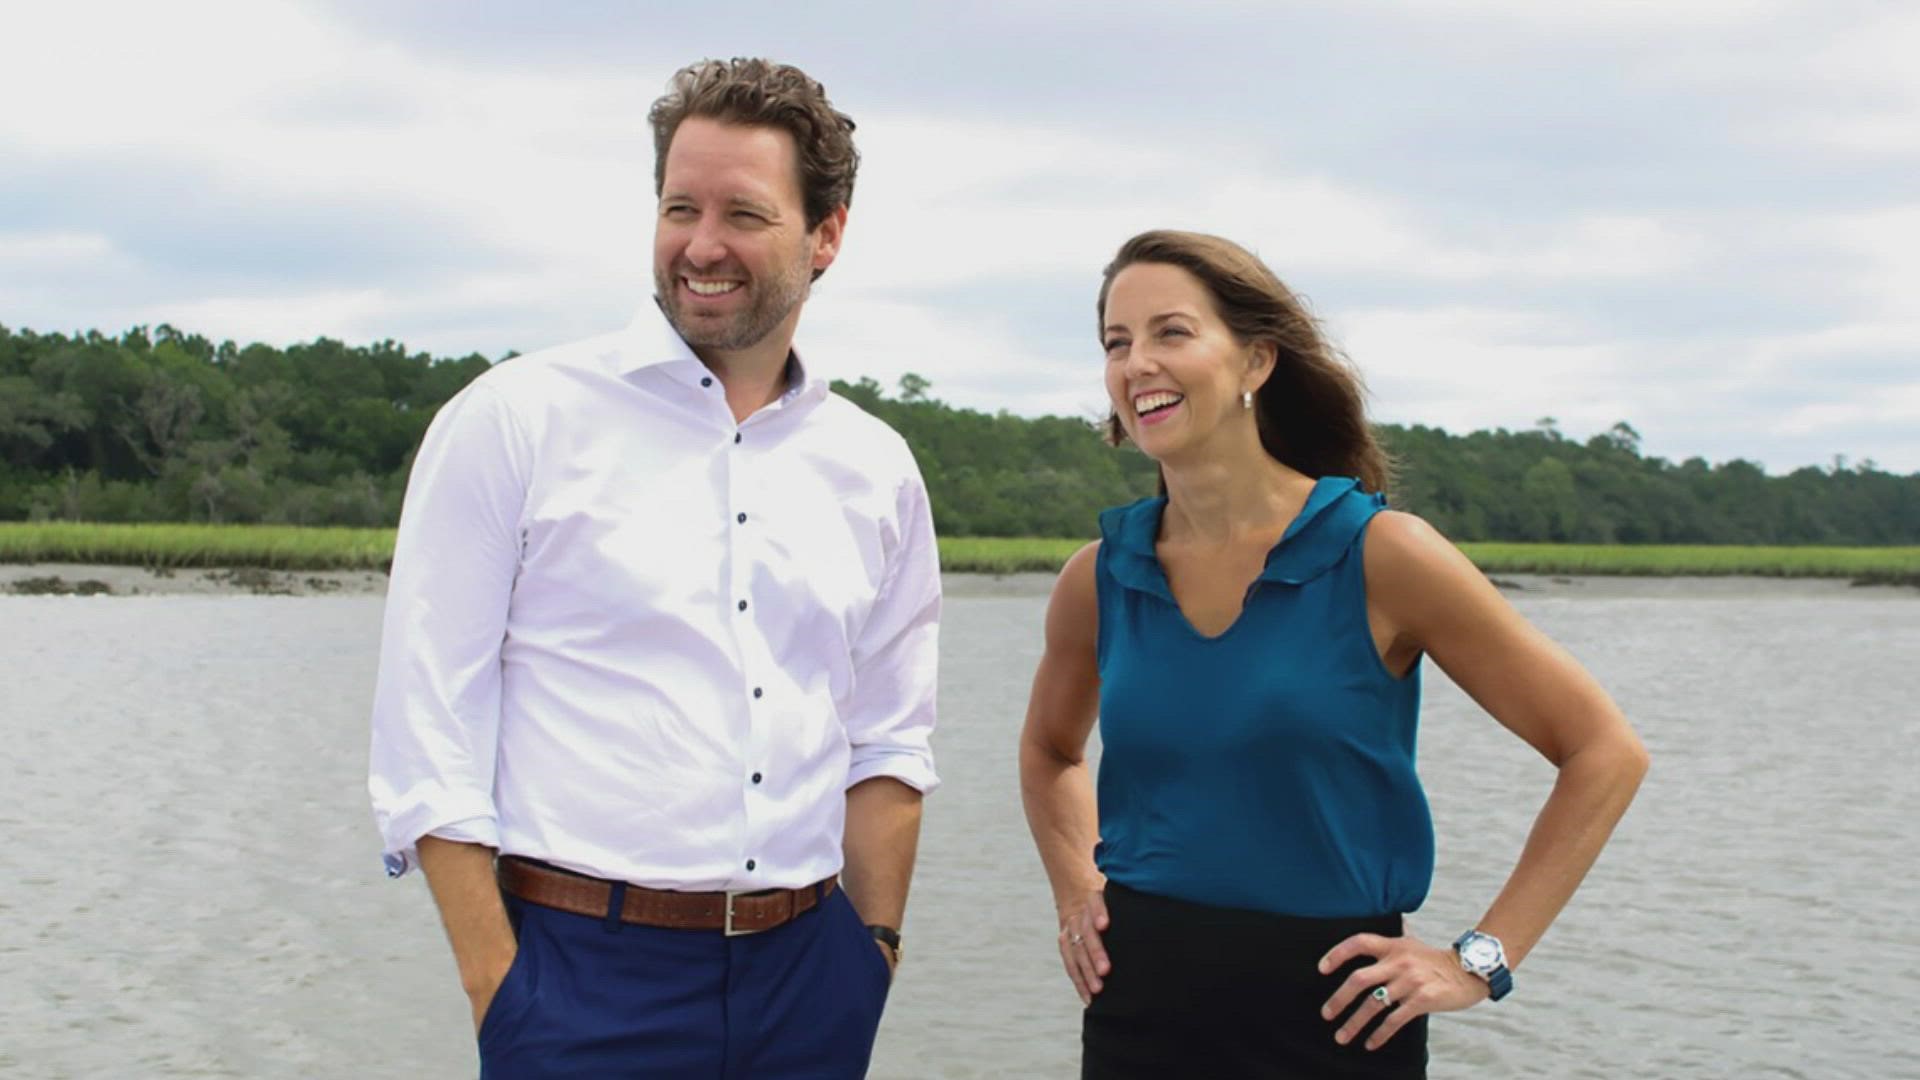 Democrat candidate for governor Joe Cunningham announced his choice for running mate, Tally Casey from Greenville.